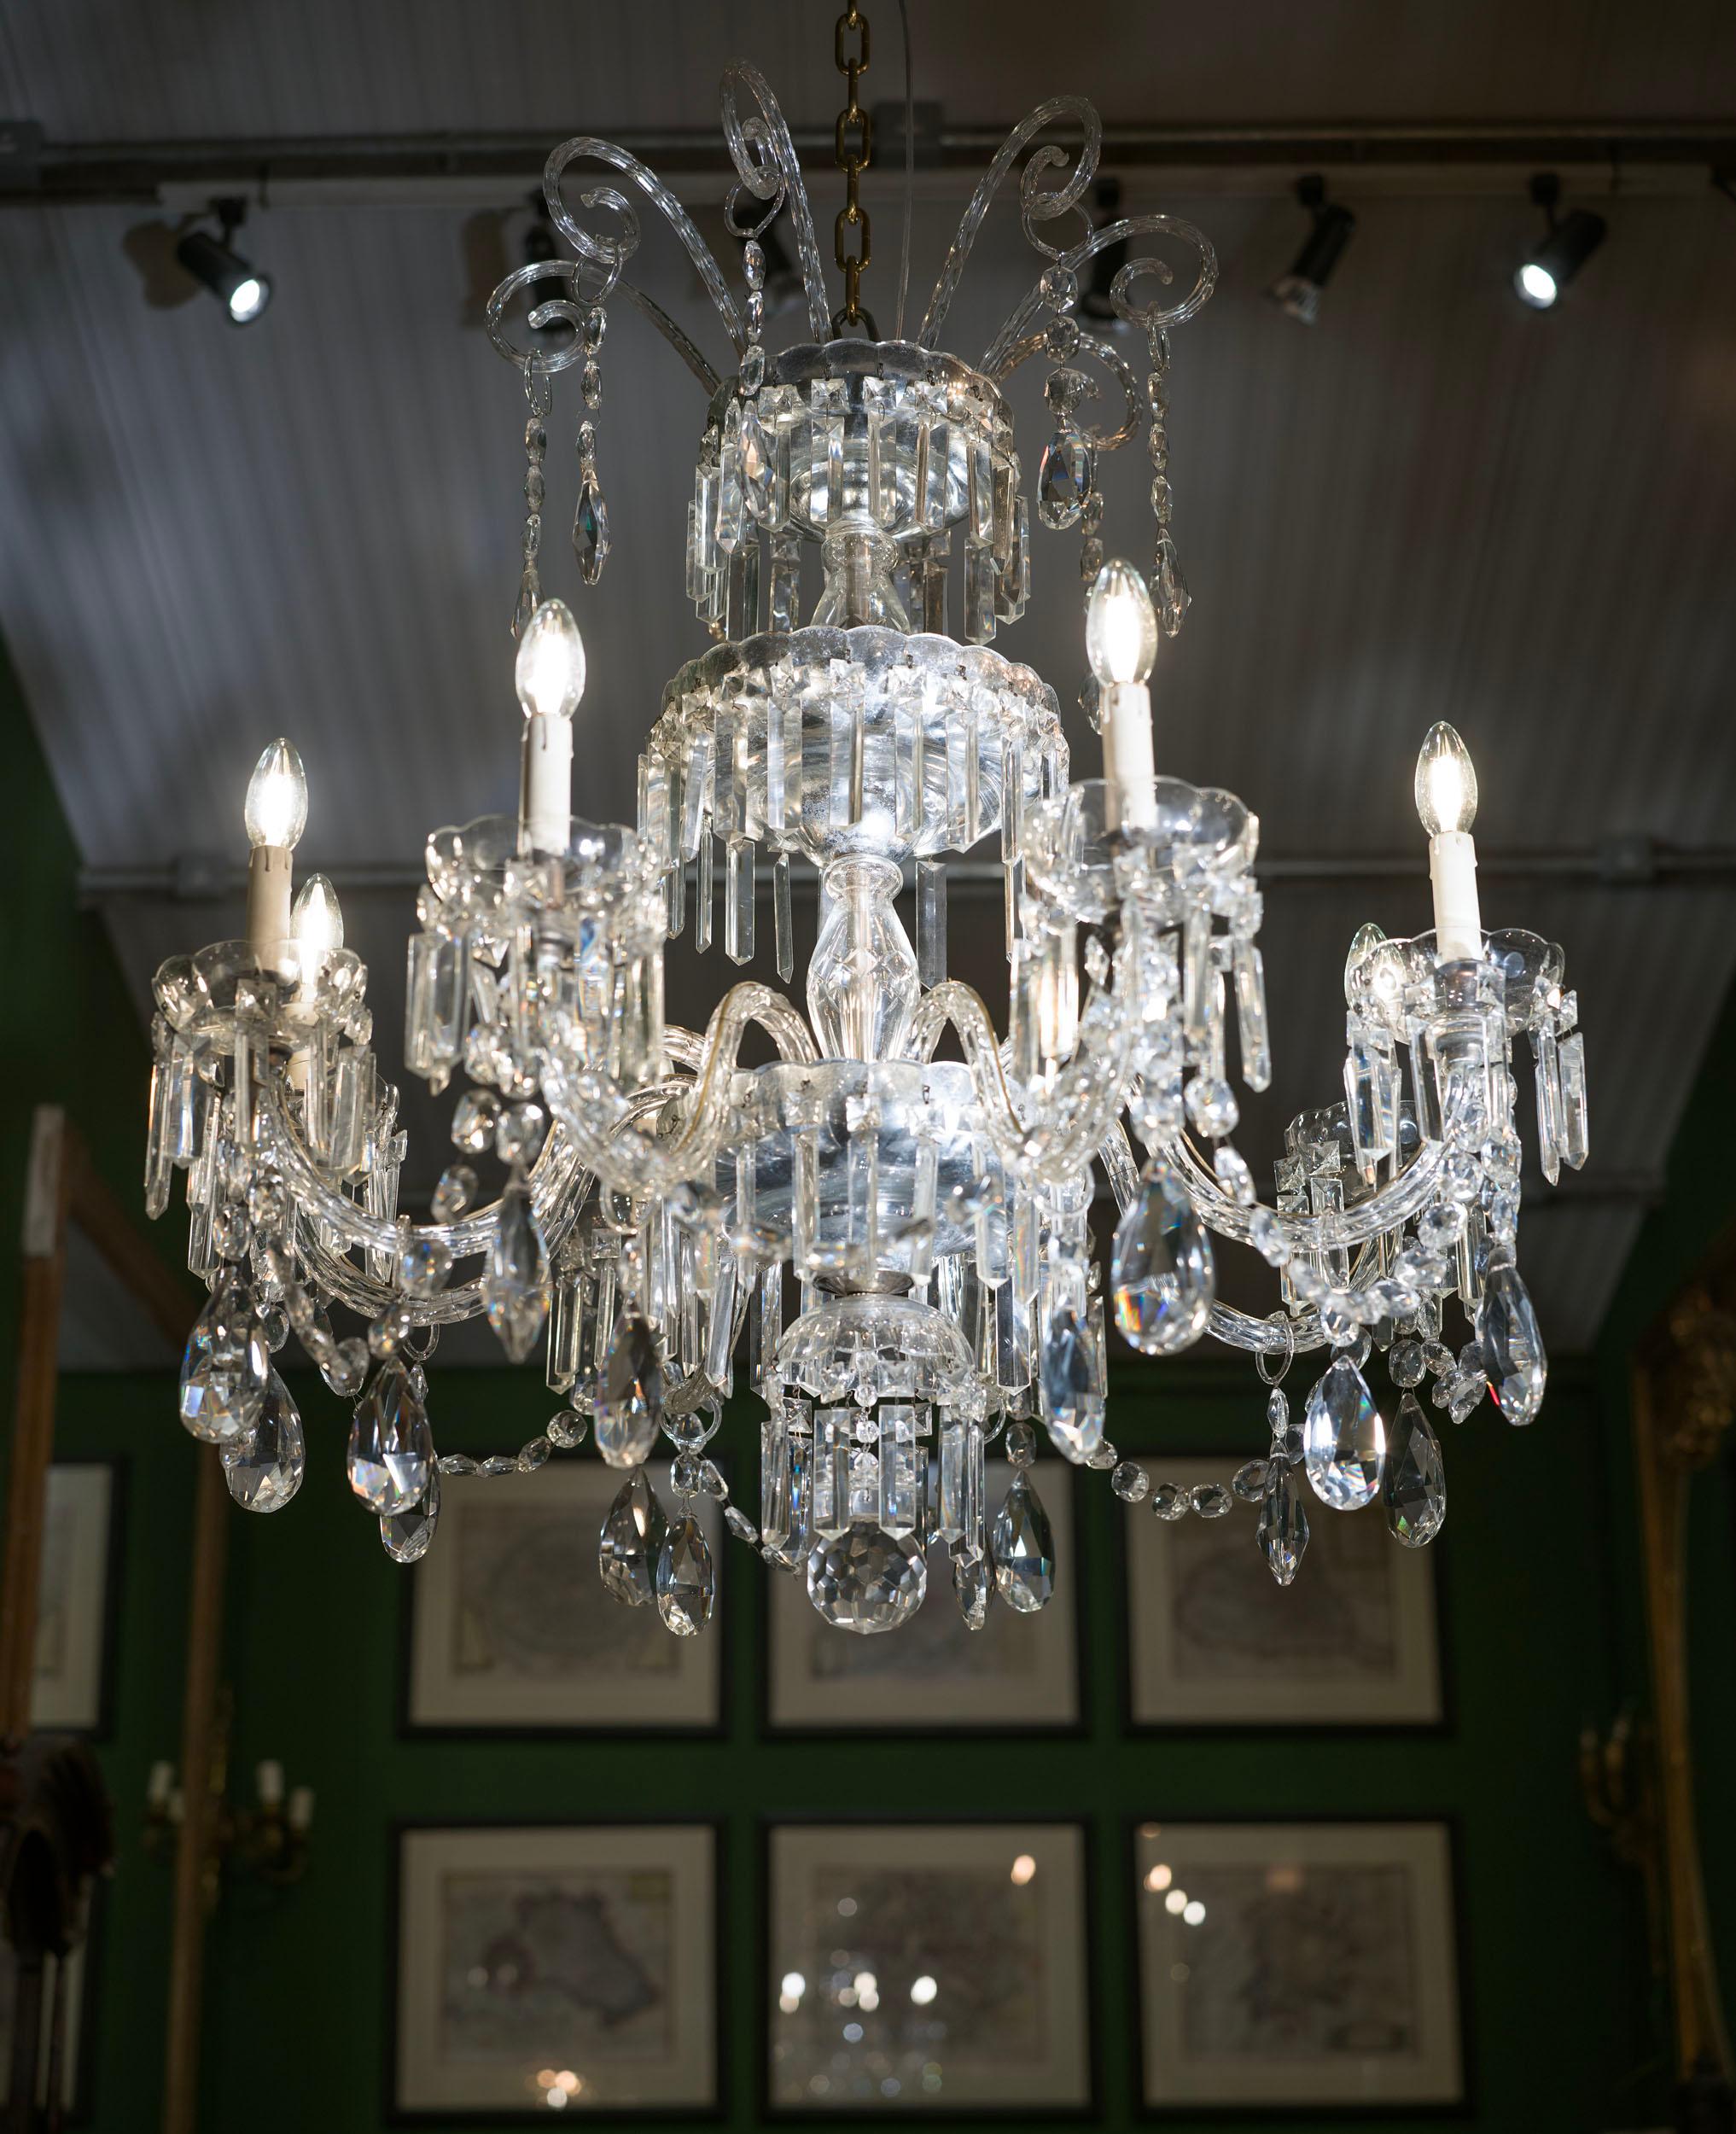 A pair of very fine and large nineteenth-century Northern Italian crystal chandeliers. The pair of eight branch chandeliers have elegant central stems mounted with silvered scalloped bowls which are hung with crisply cut prism drops, from which